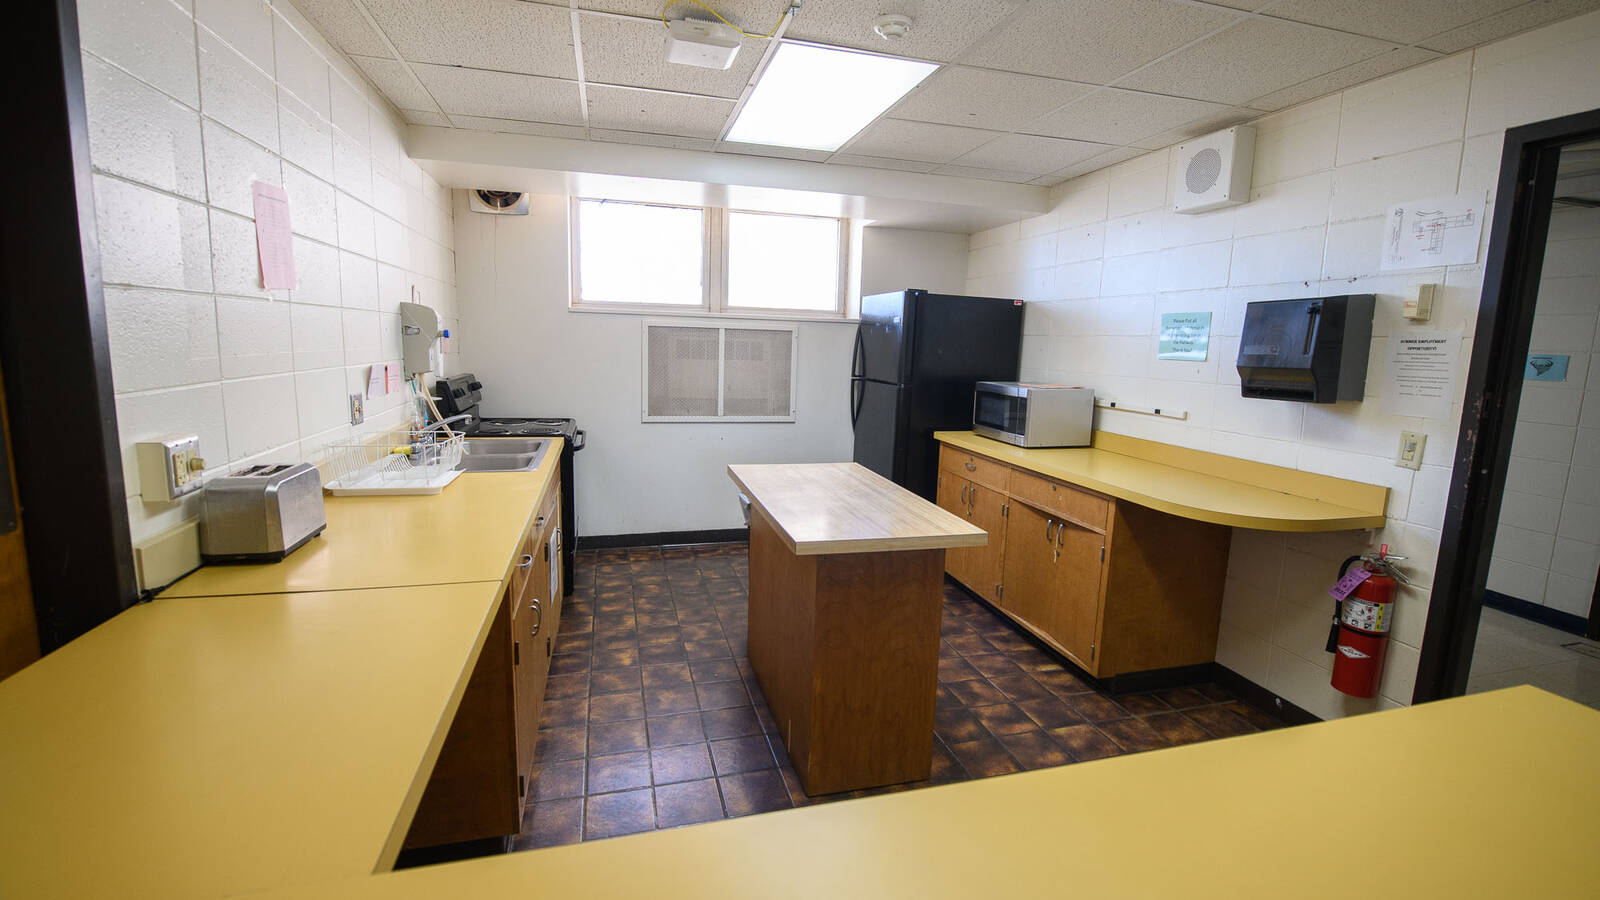 Kitchen area in Murry Hall with an oven/stove, fridge, microwave, toaster, cabinets, and counter space.